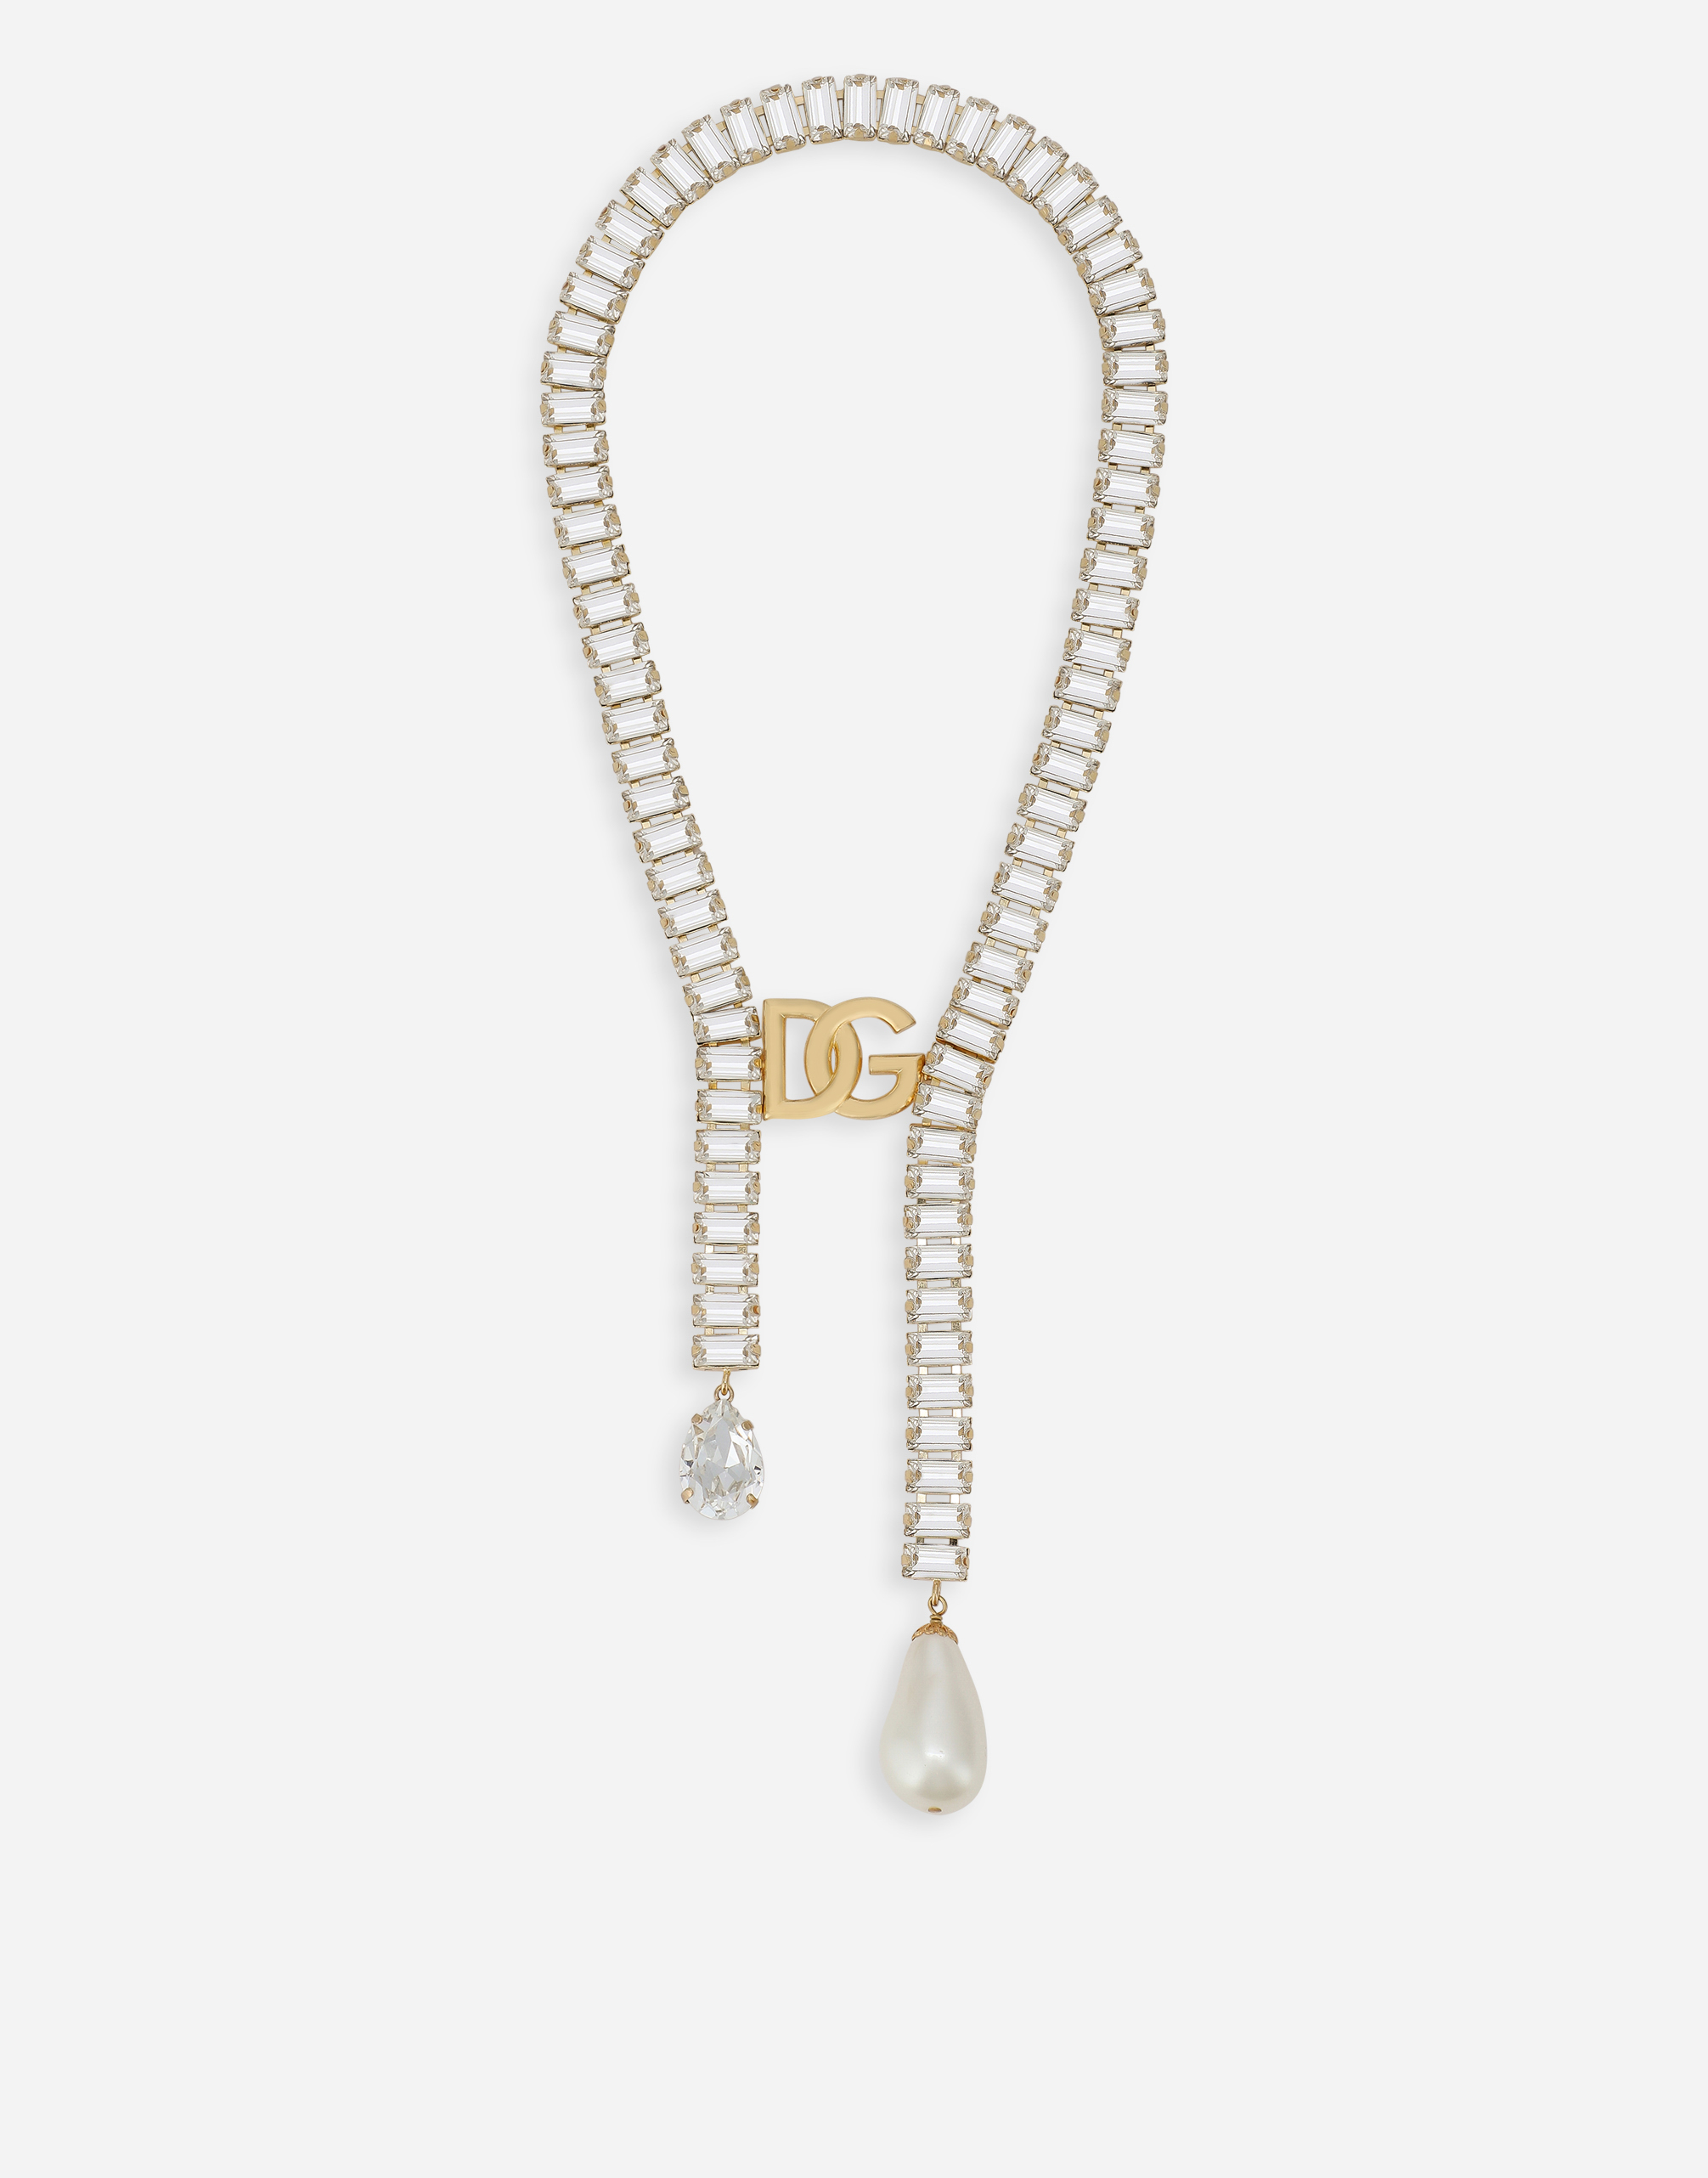 Necklace with pearls, rhinestones and DG logo in Gold